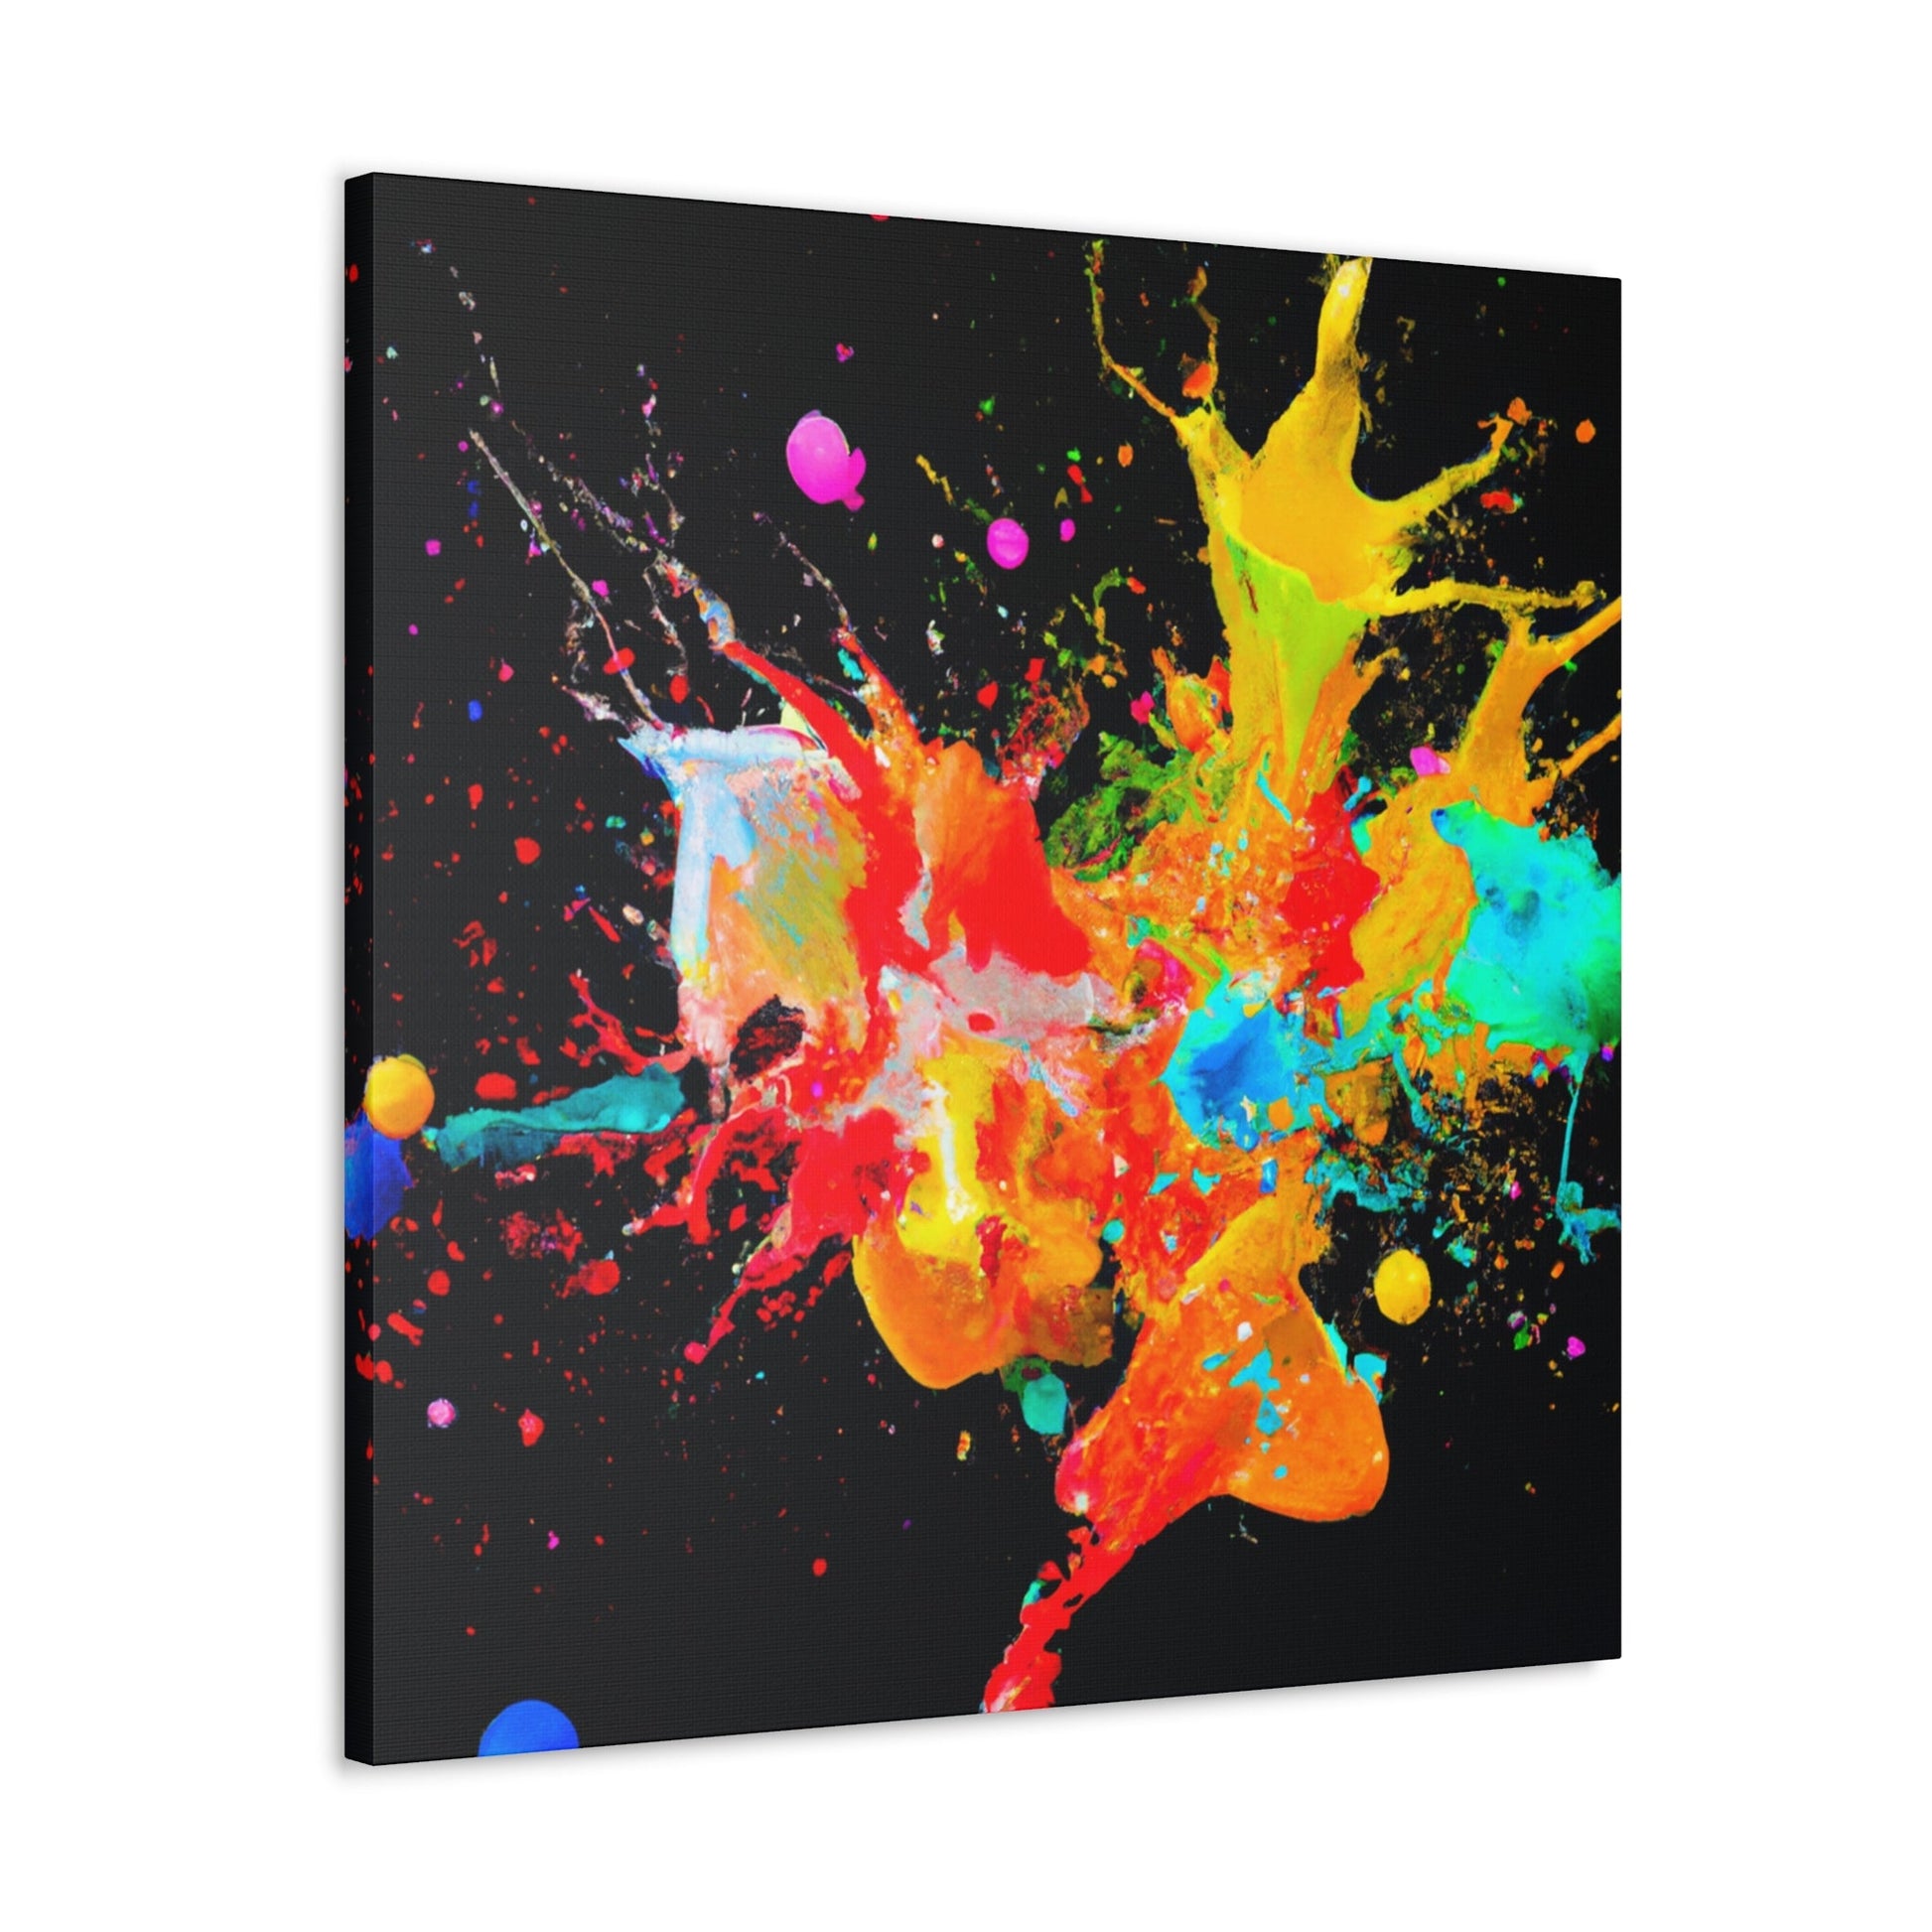 Ivan the Magnificent - Canvas-Canvas-Mr.Zao - Krazy Art Gallery